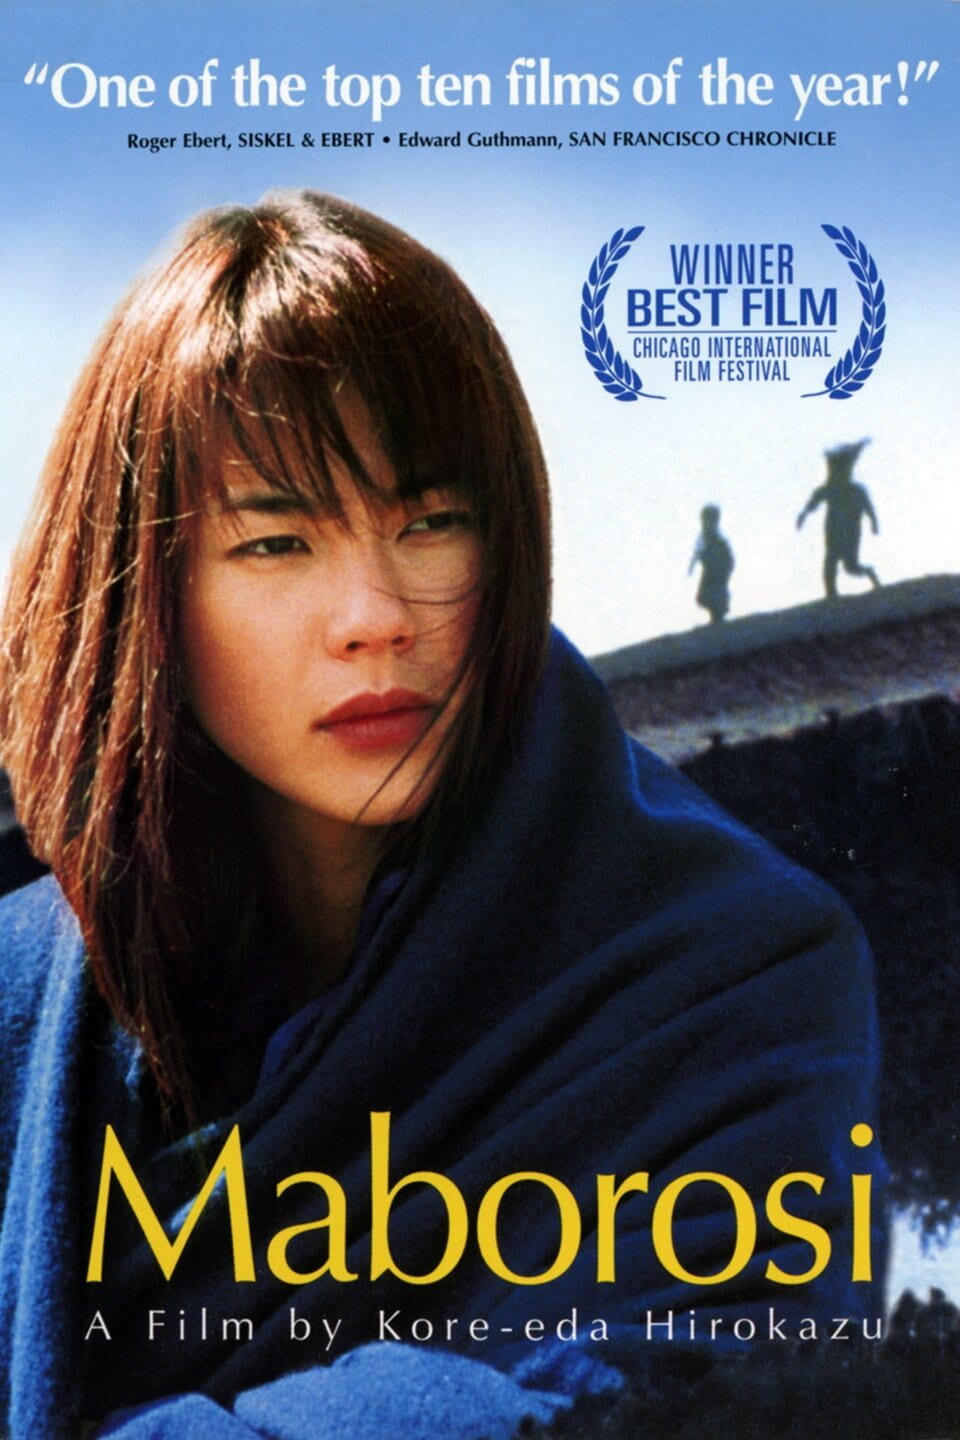 Poster for MABOROSI